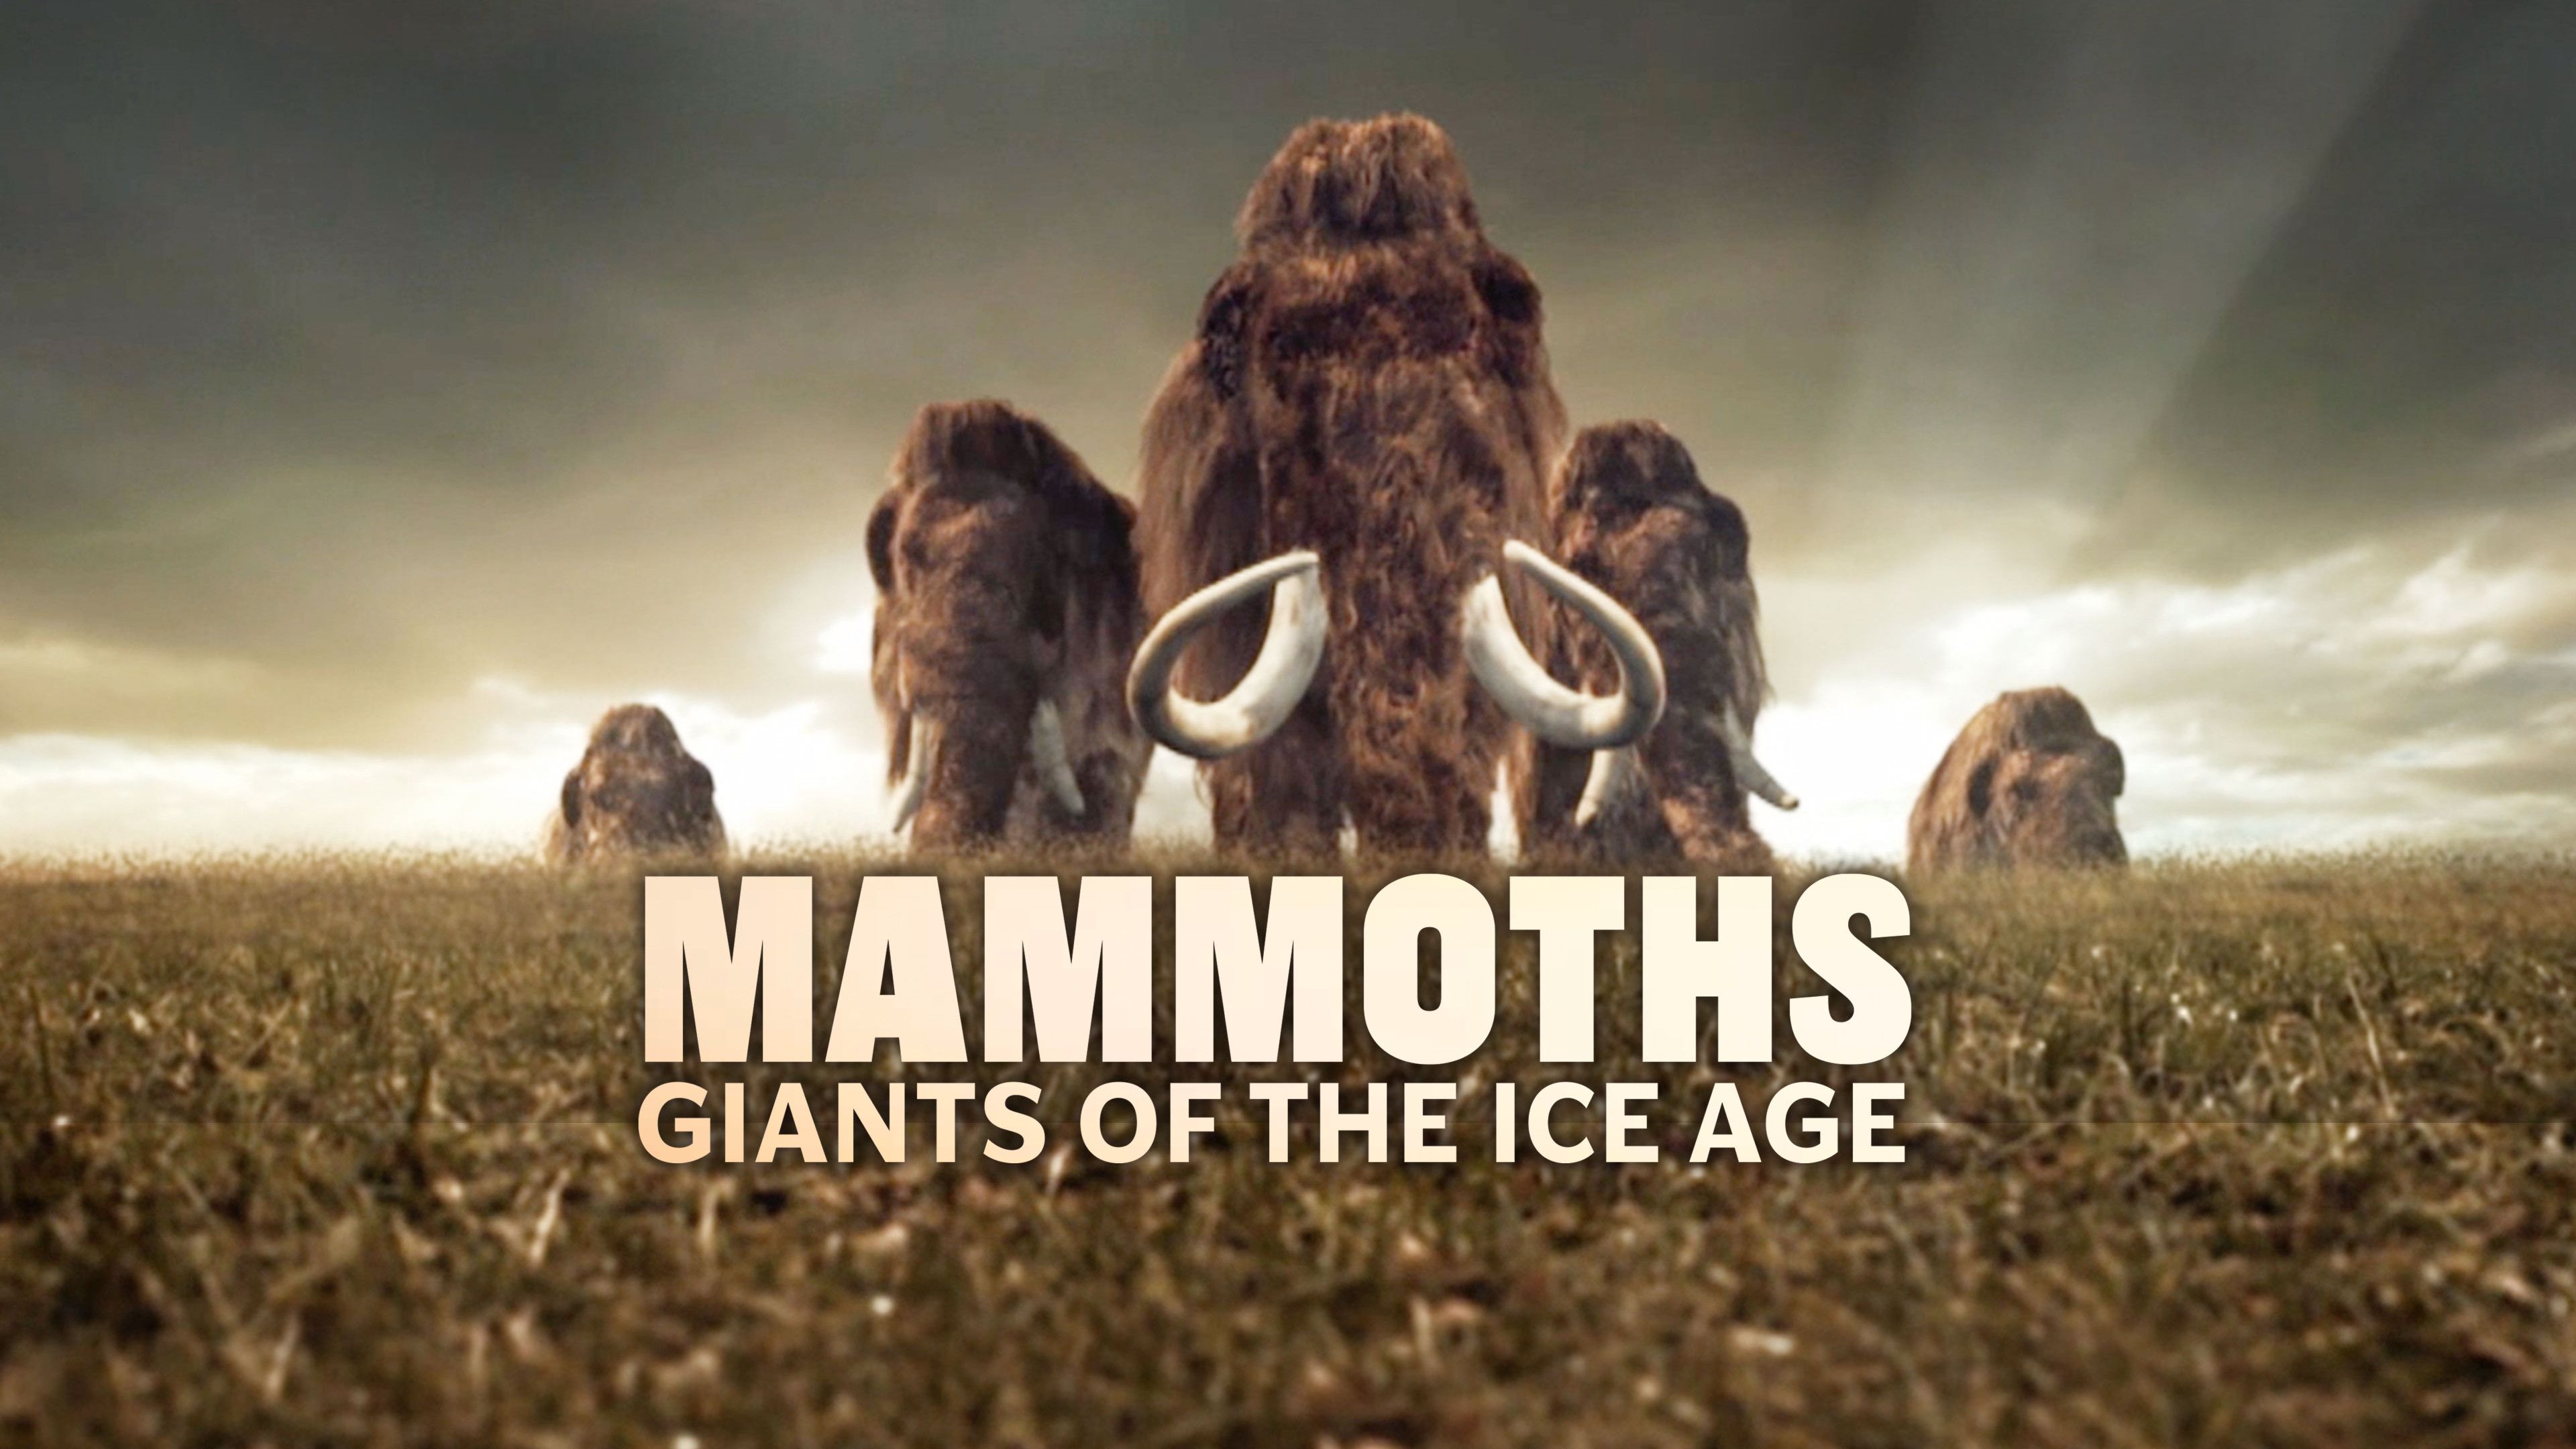 Mammoths: Giants Of The Ice Age